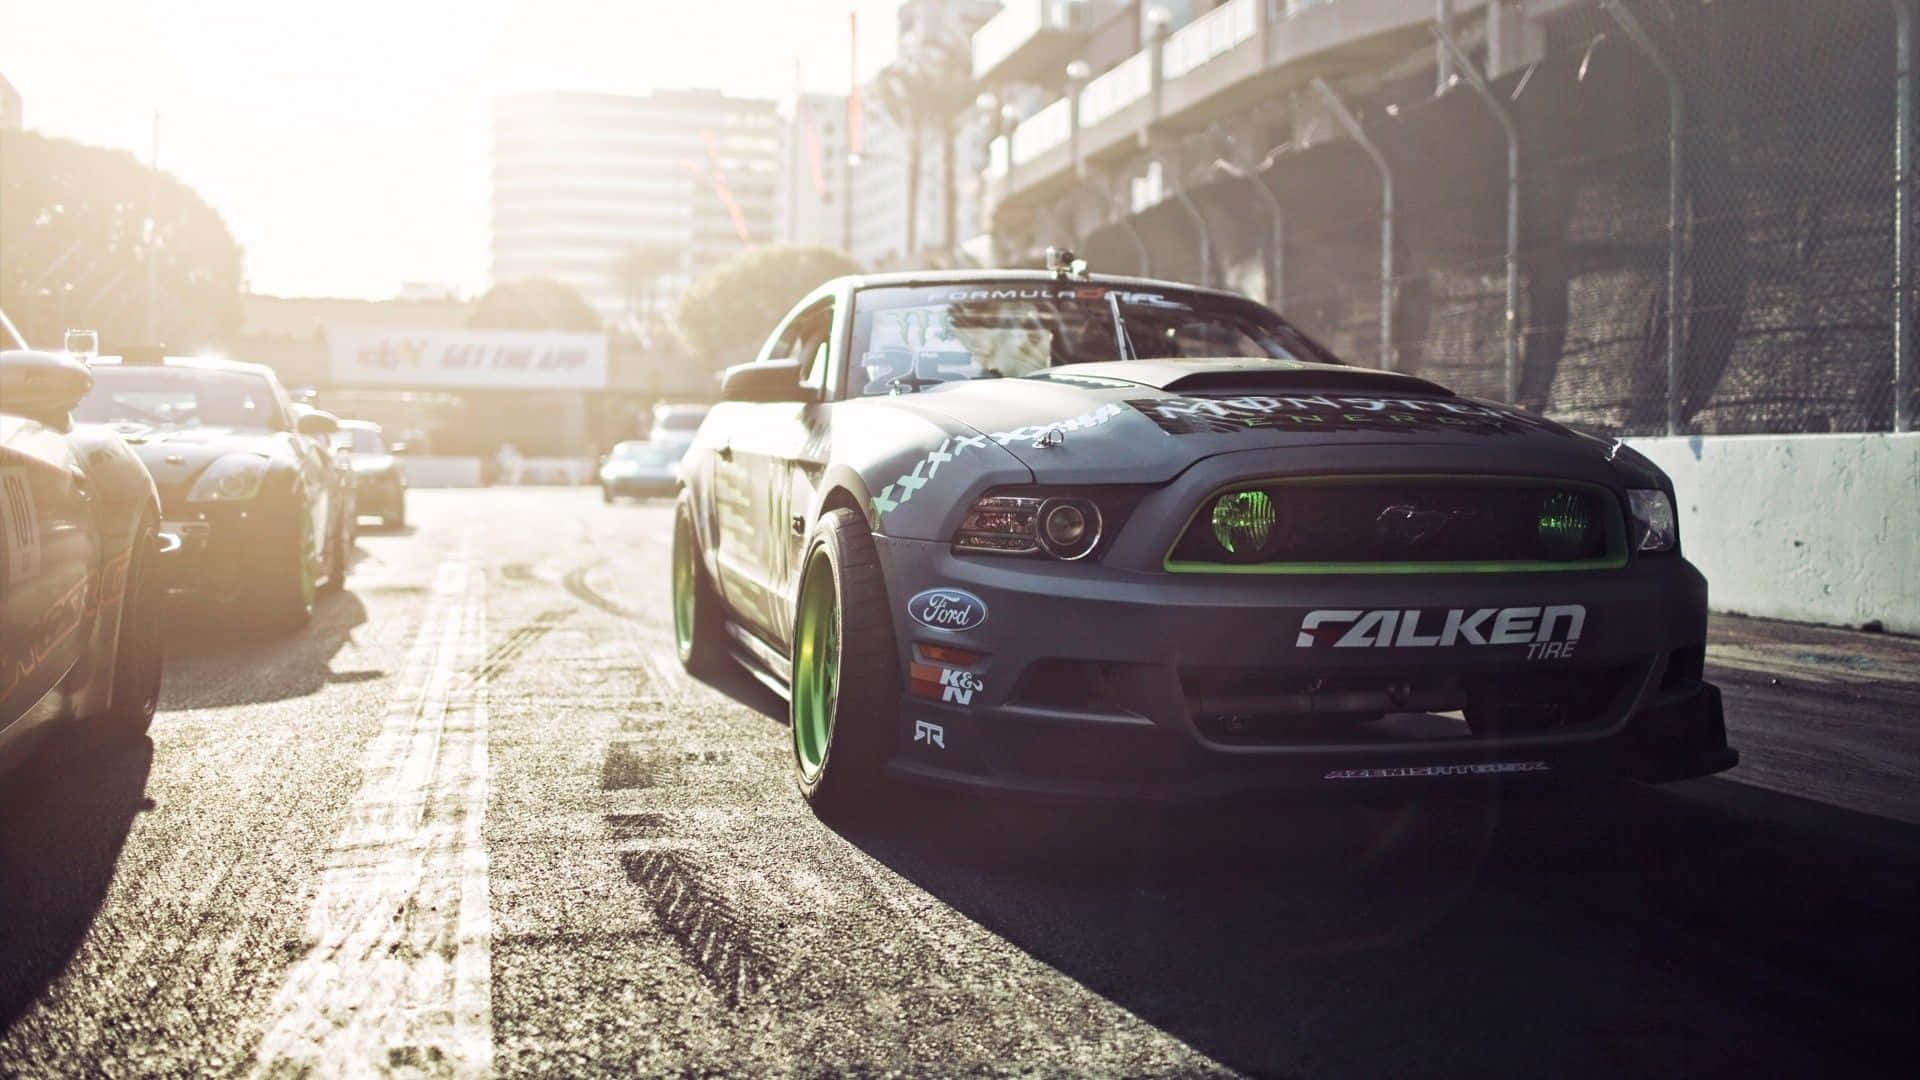 "Car racing in its purest form - HD Dirt 3"